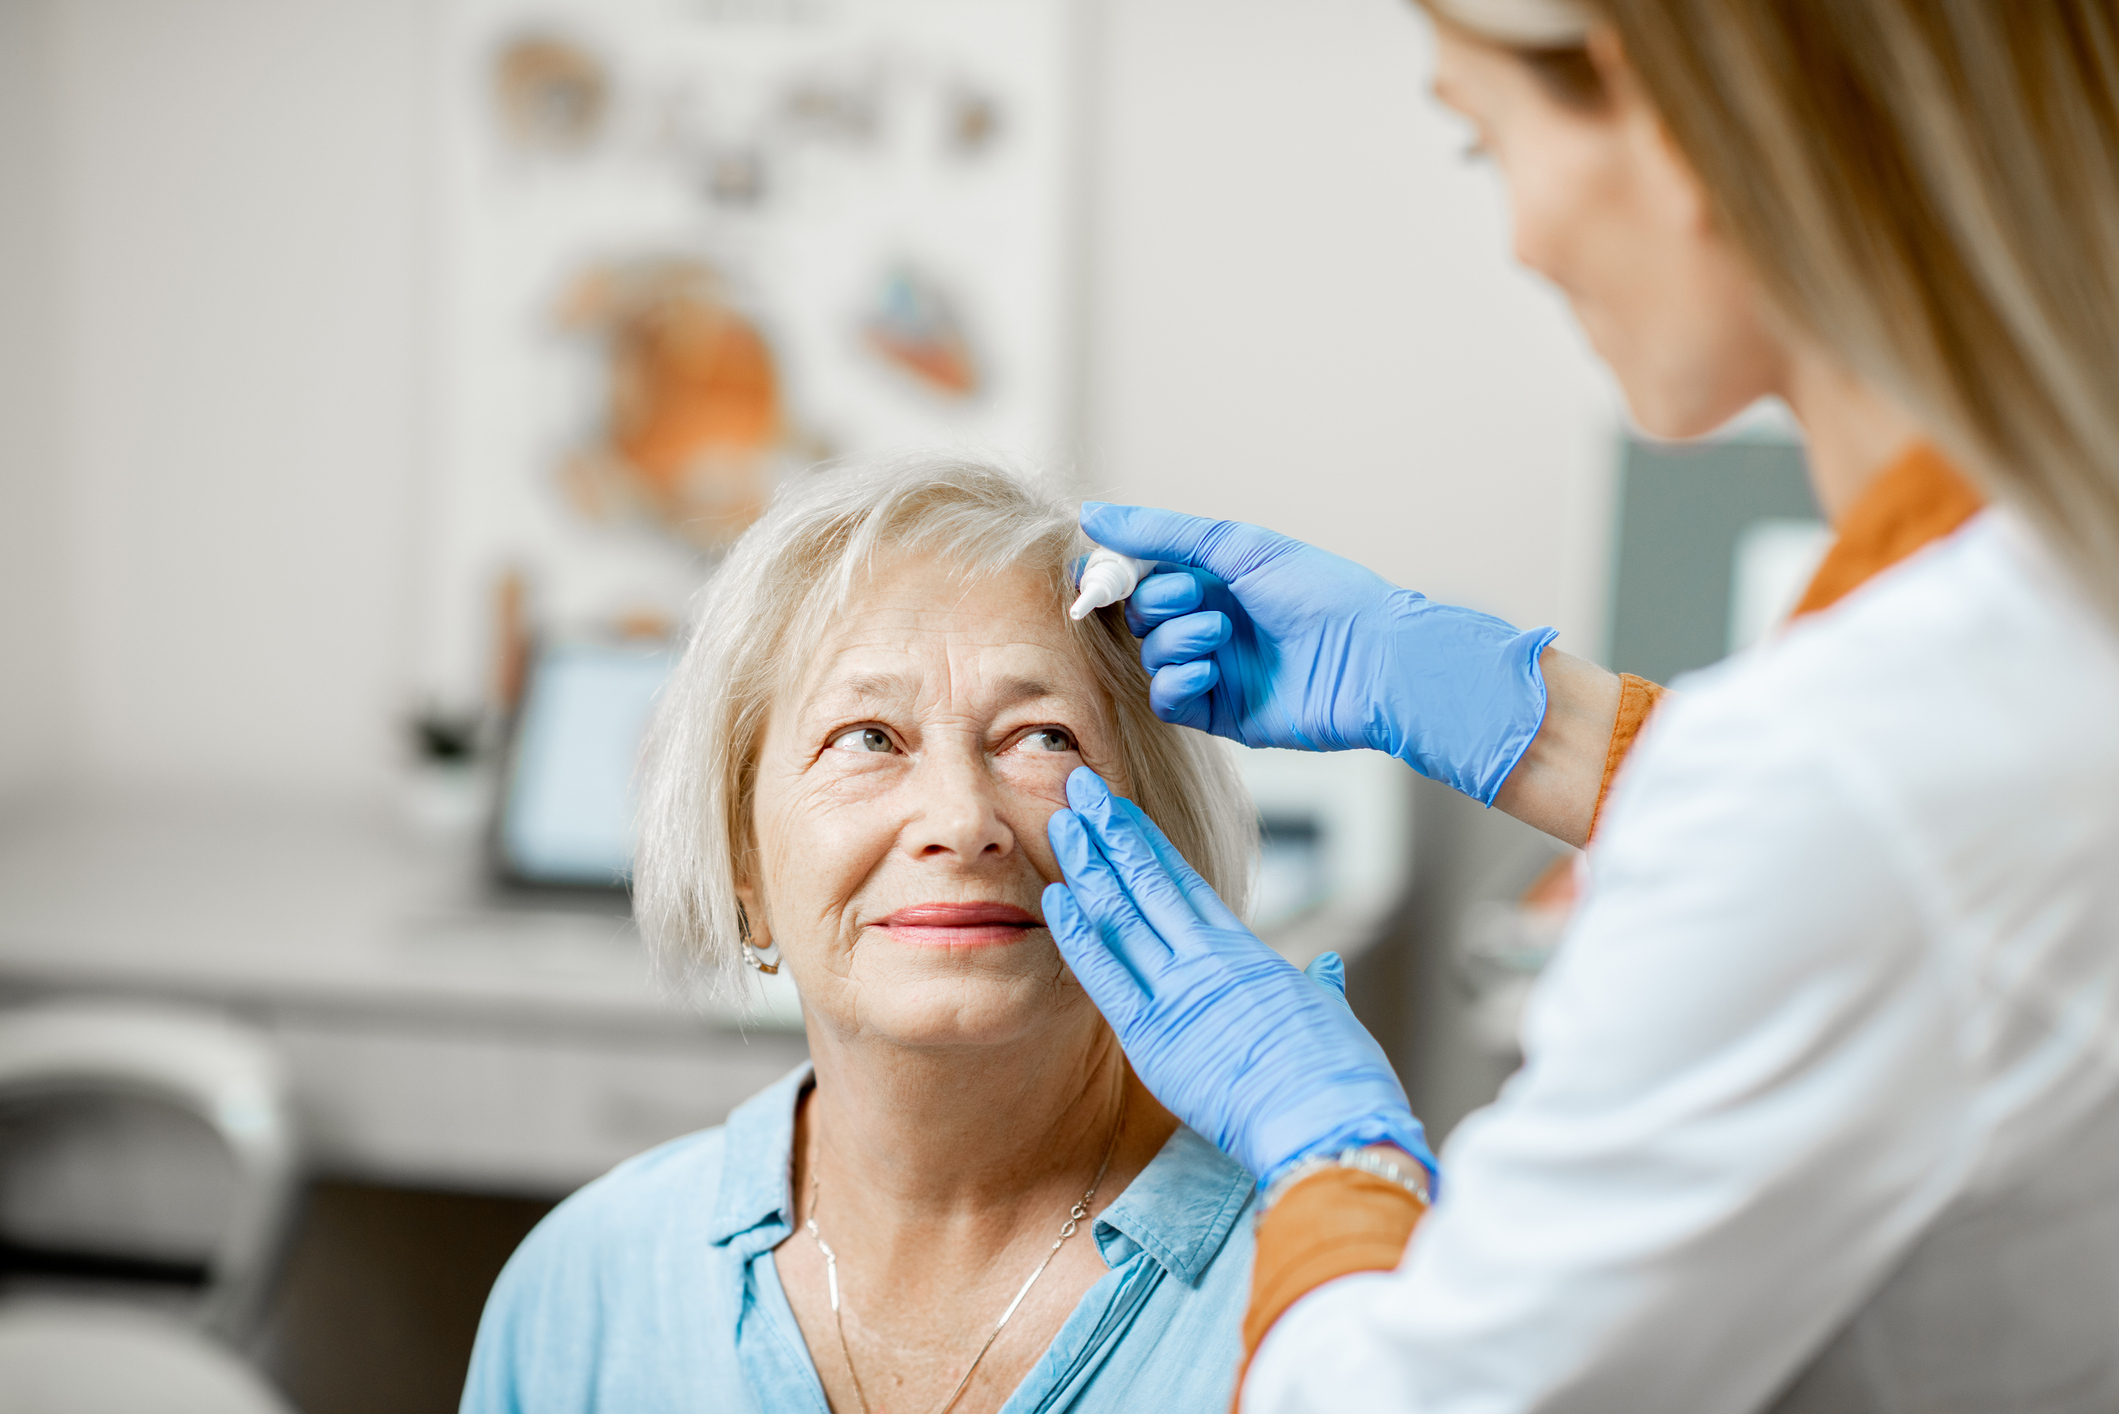 A doctor applying eyedrops to an older woman